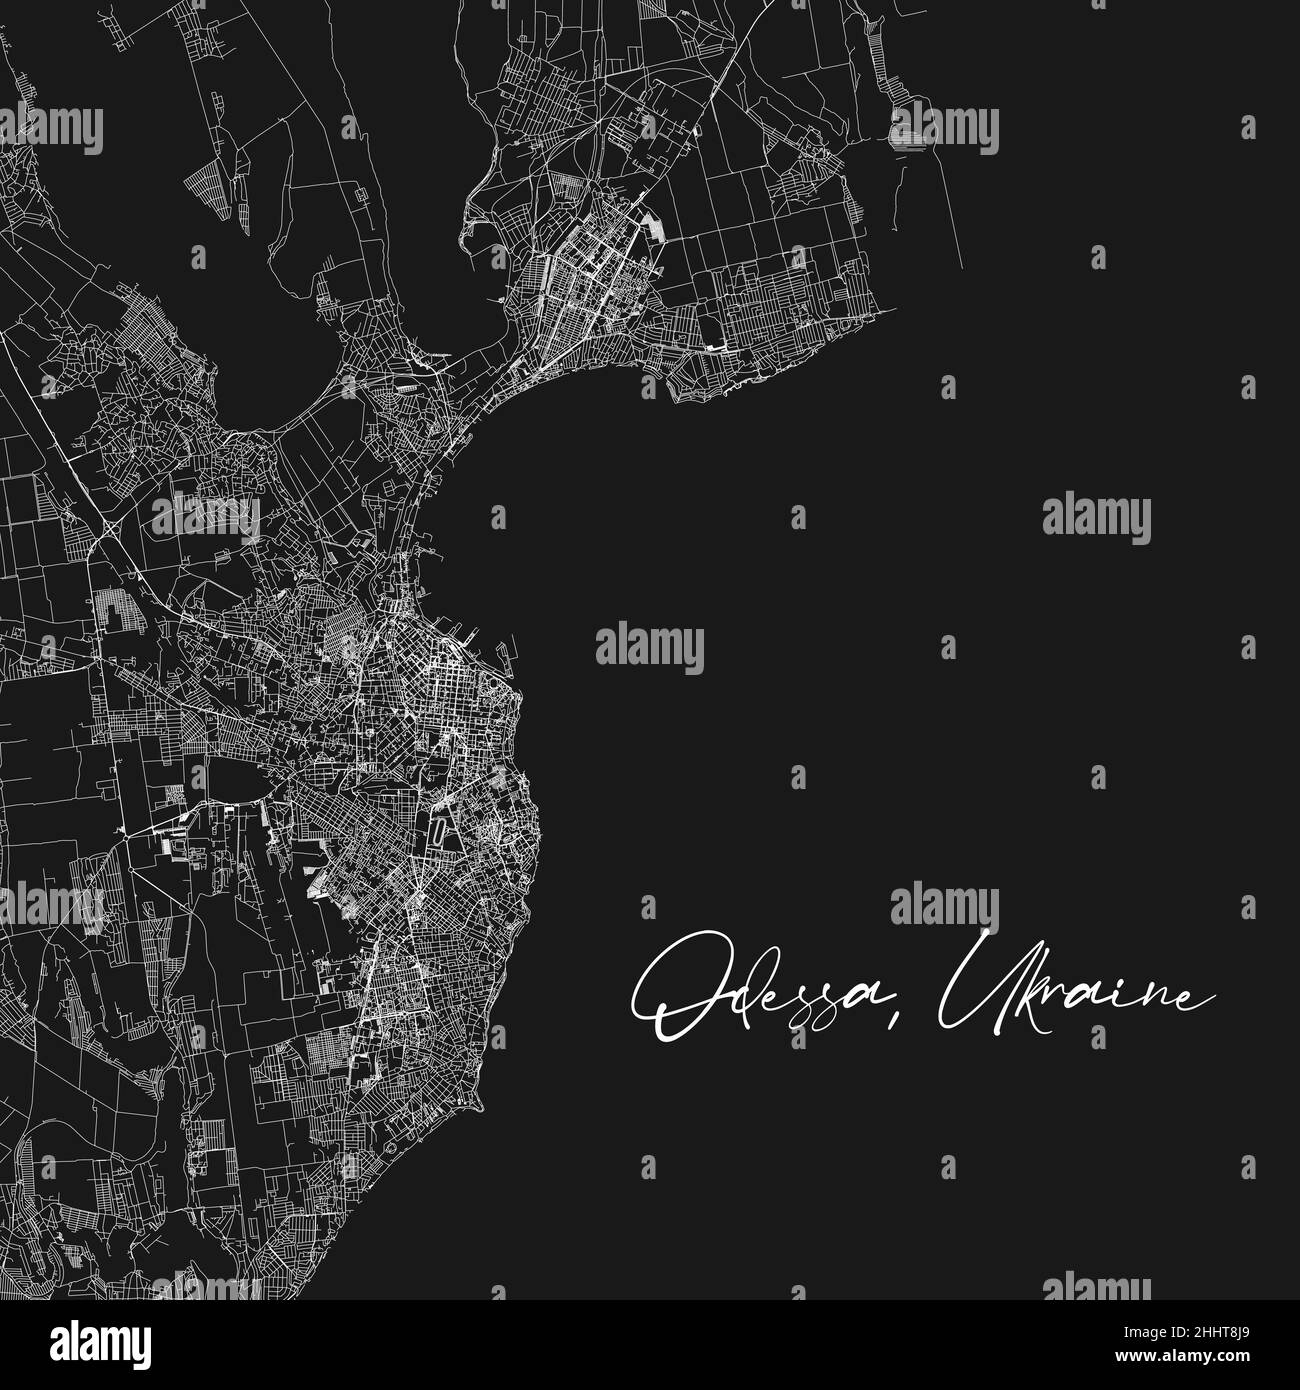 Odesa Odessa black and white city map. Vector illustration, Odessa map grayscale art poster. Street map image with roads, metropolitan city area view. Stock Vector